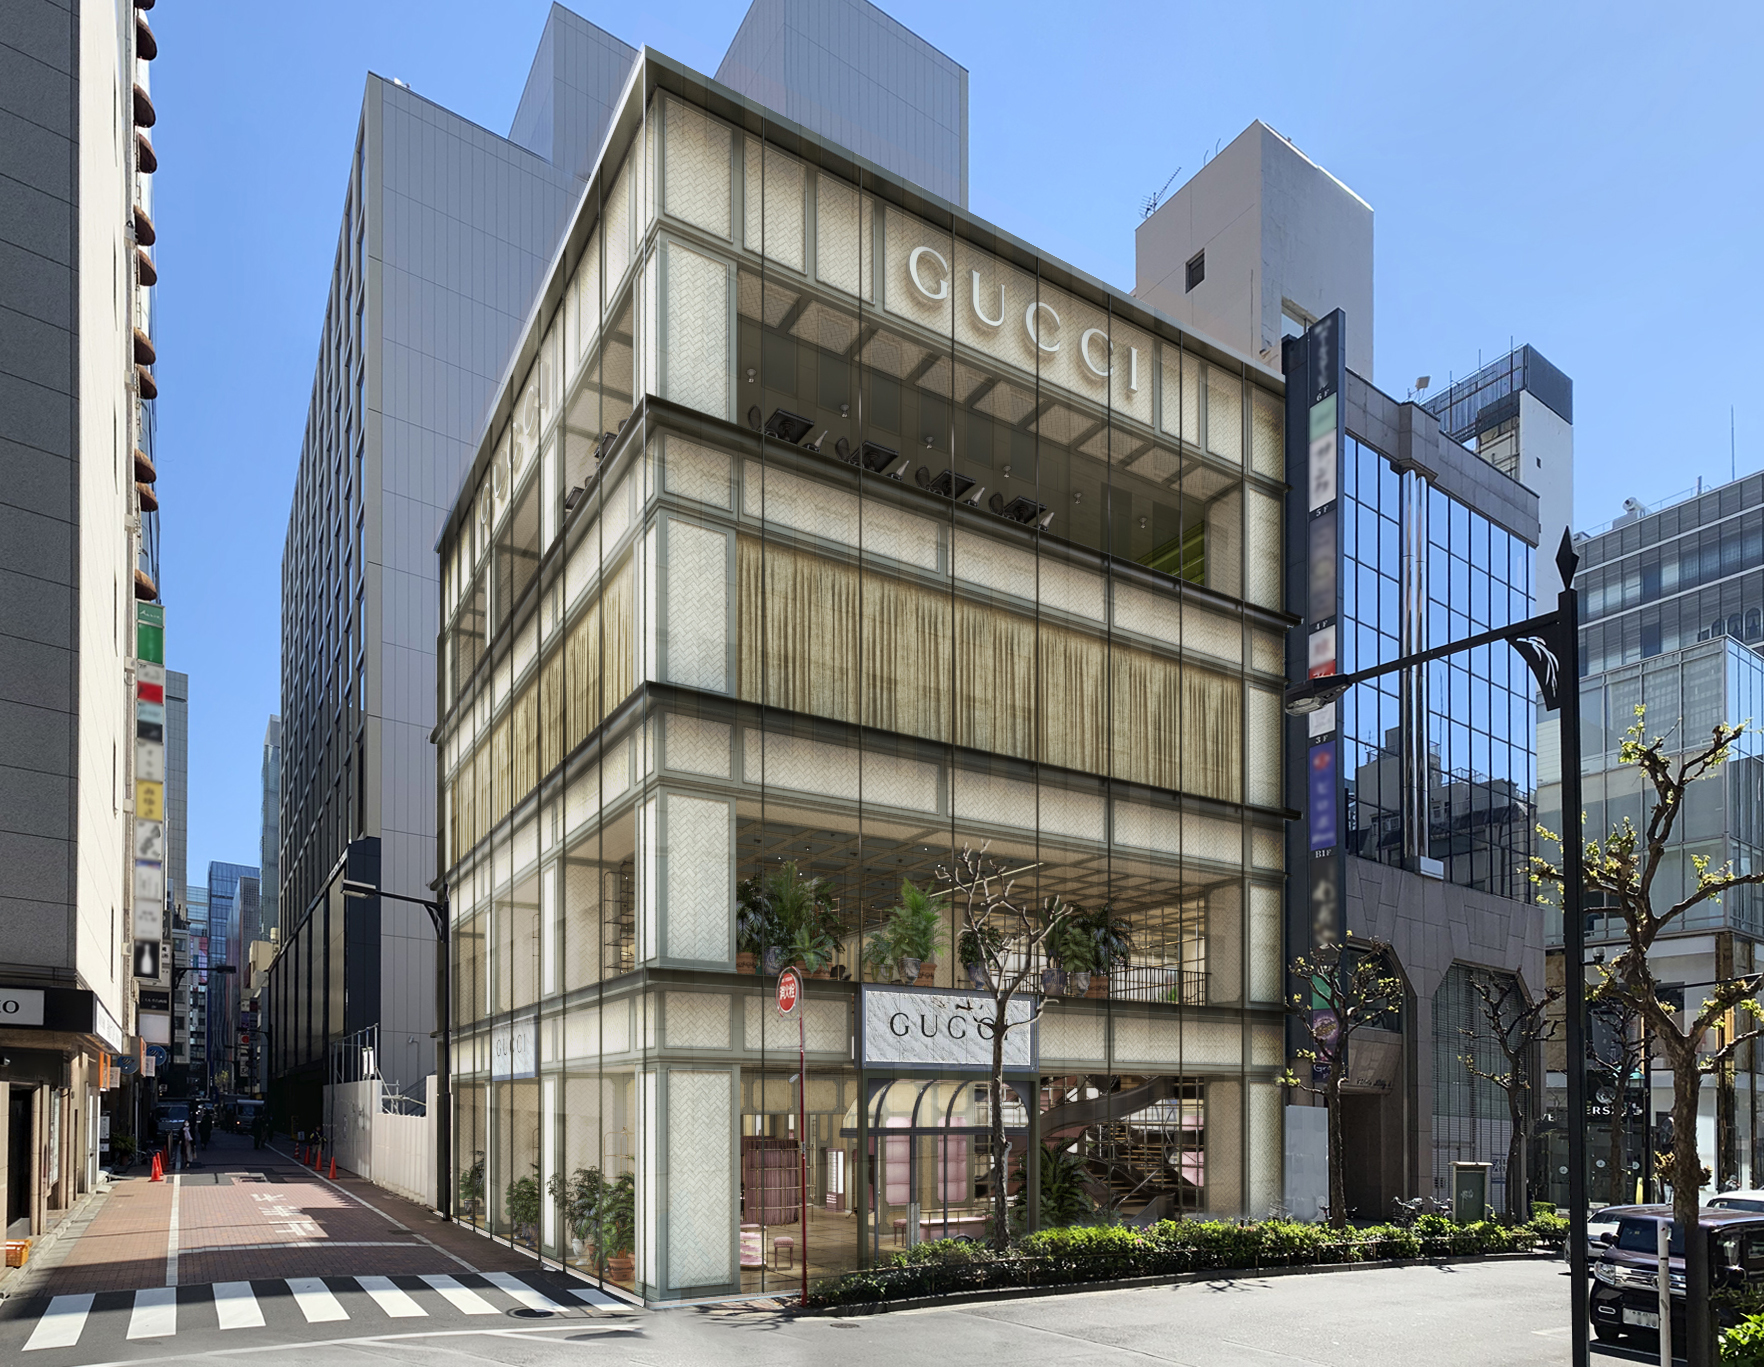 is opening a Massimo Bottura its new Ginza flagship store